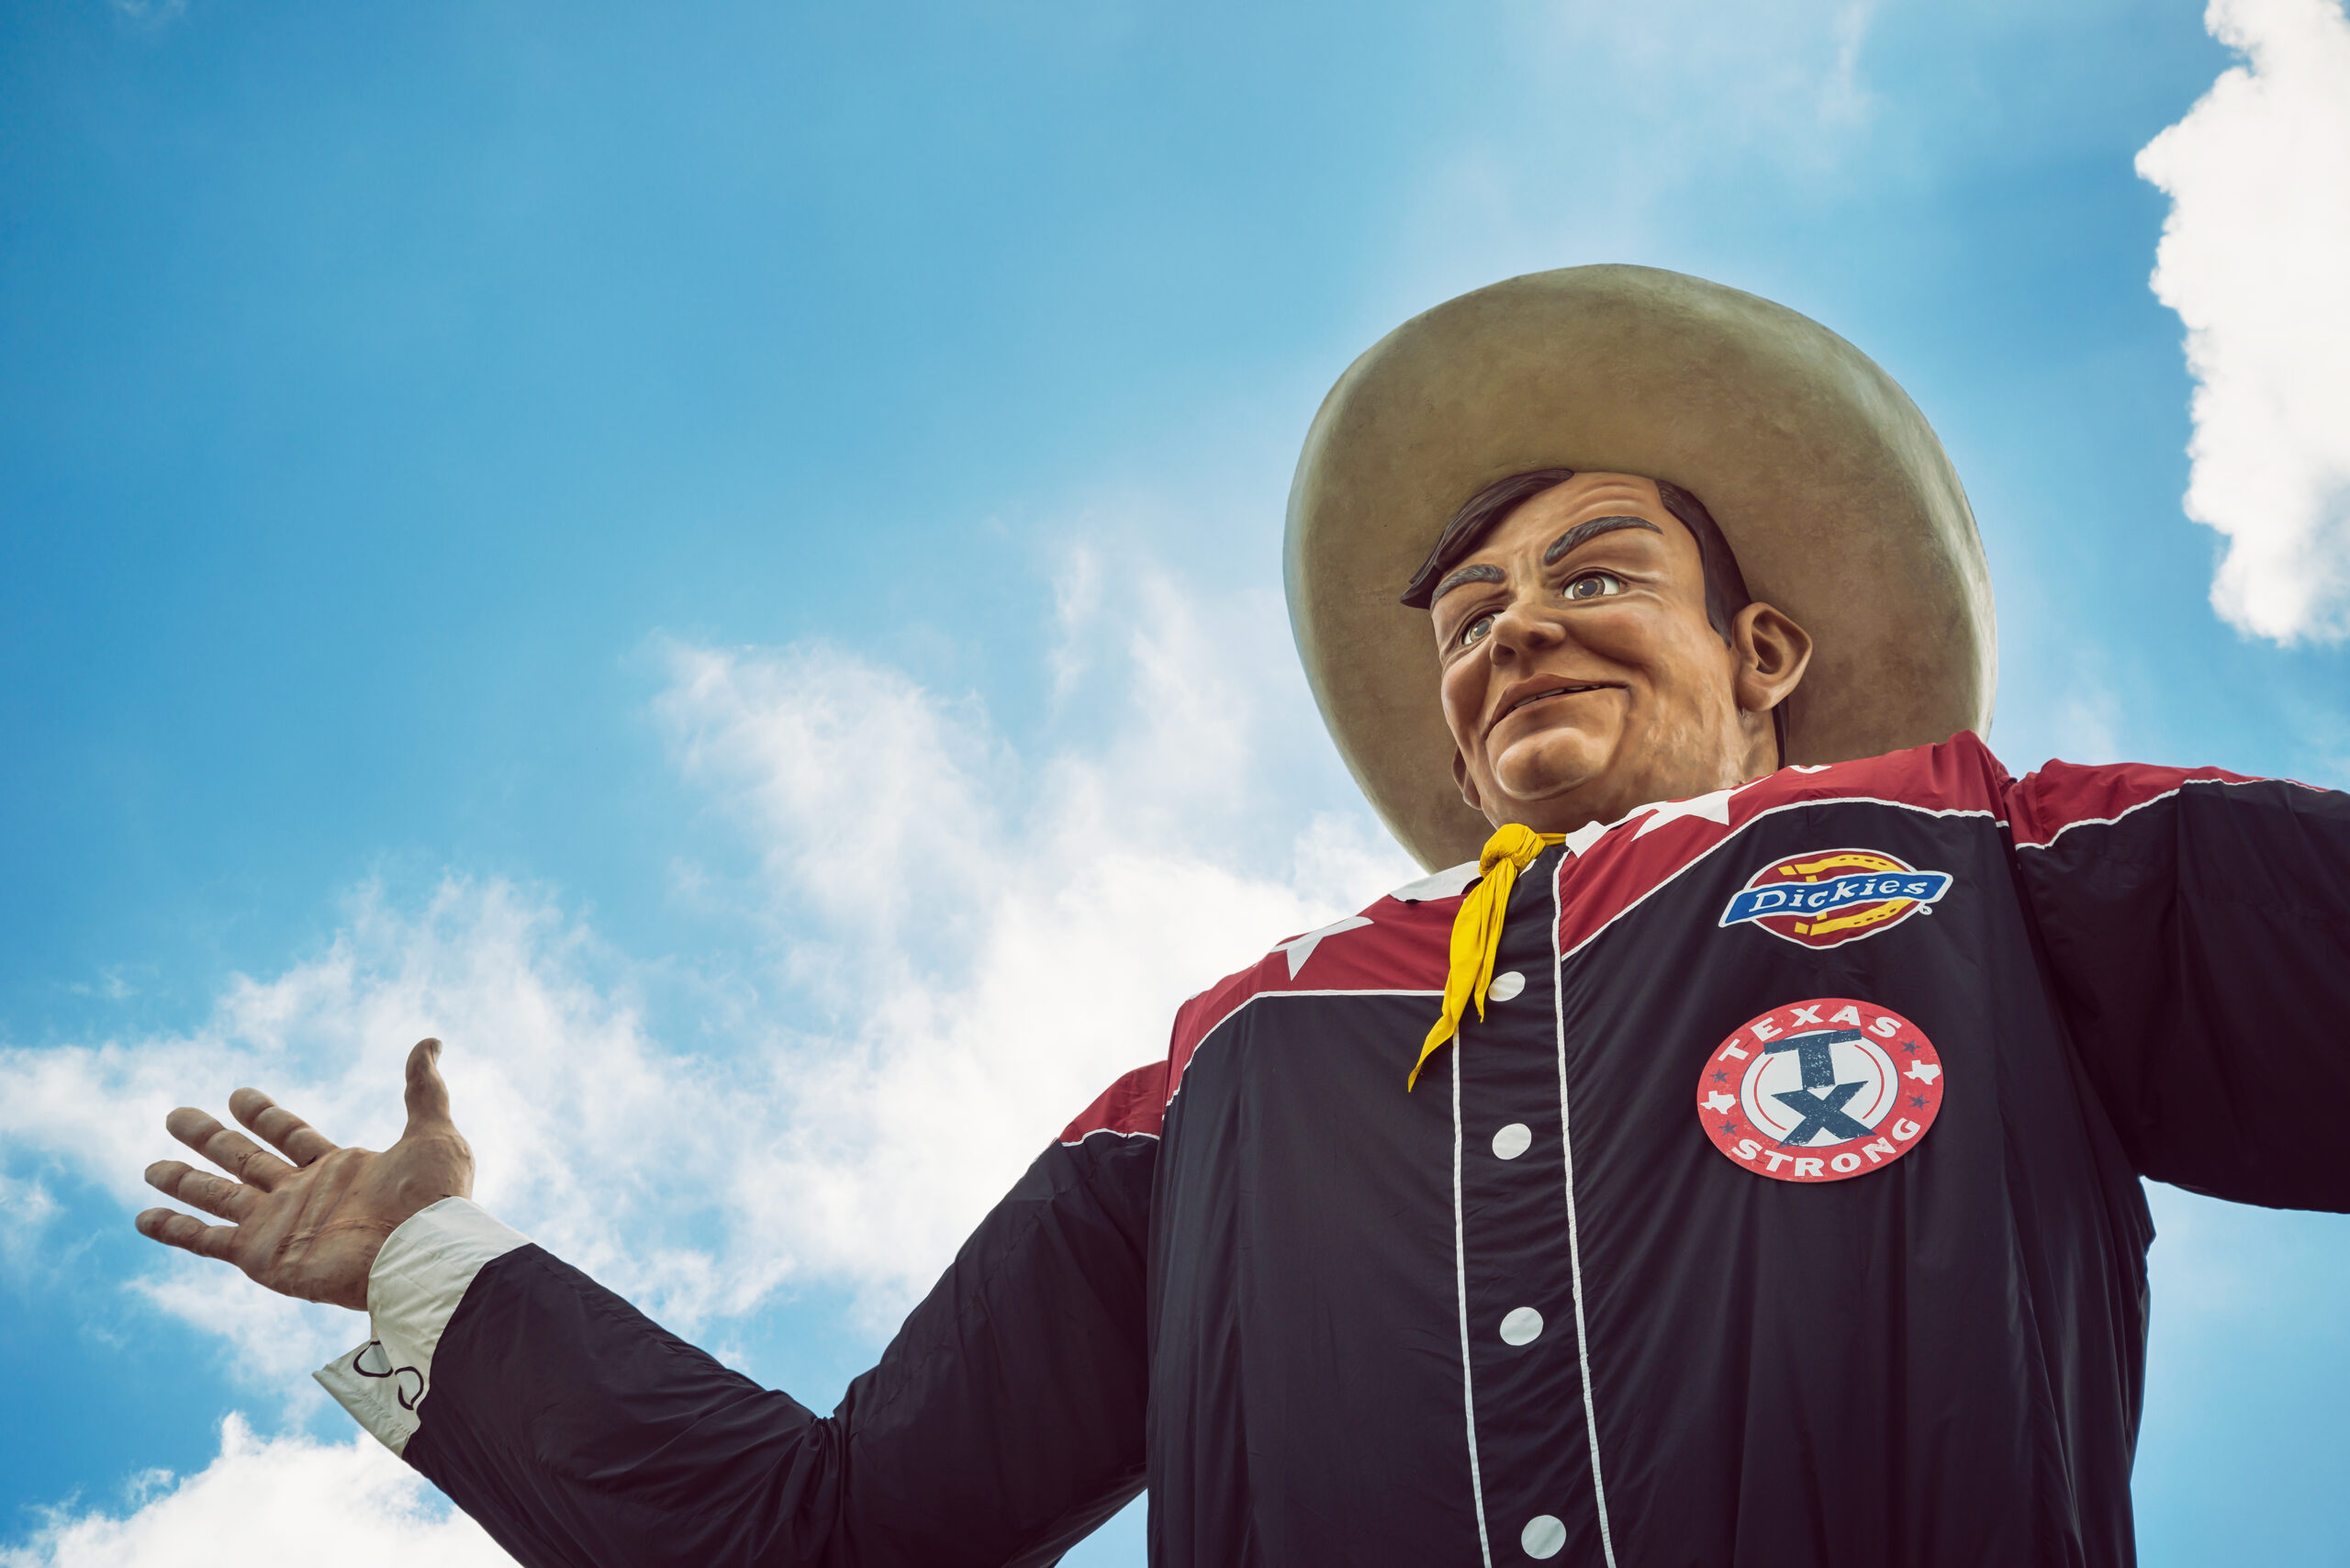 The torso, face and arm of the giant Big Tex statue at the Texas State Fair. The cowboy statue is seen from beneath, under a partly cloudy blue sky.